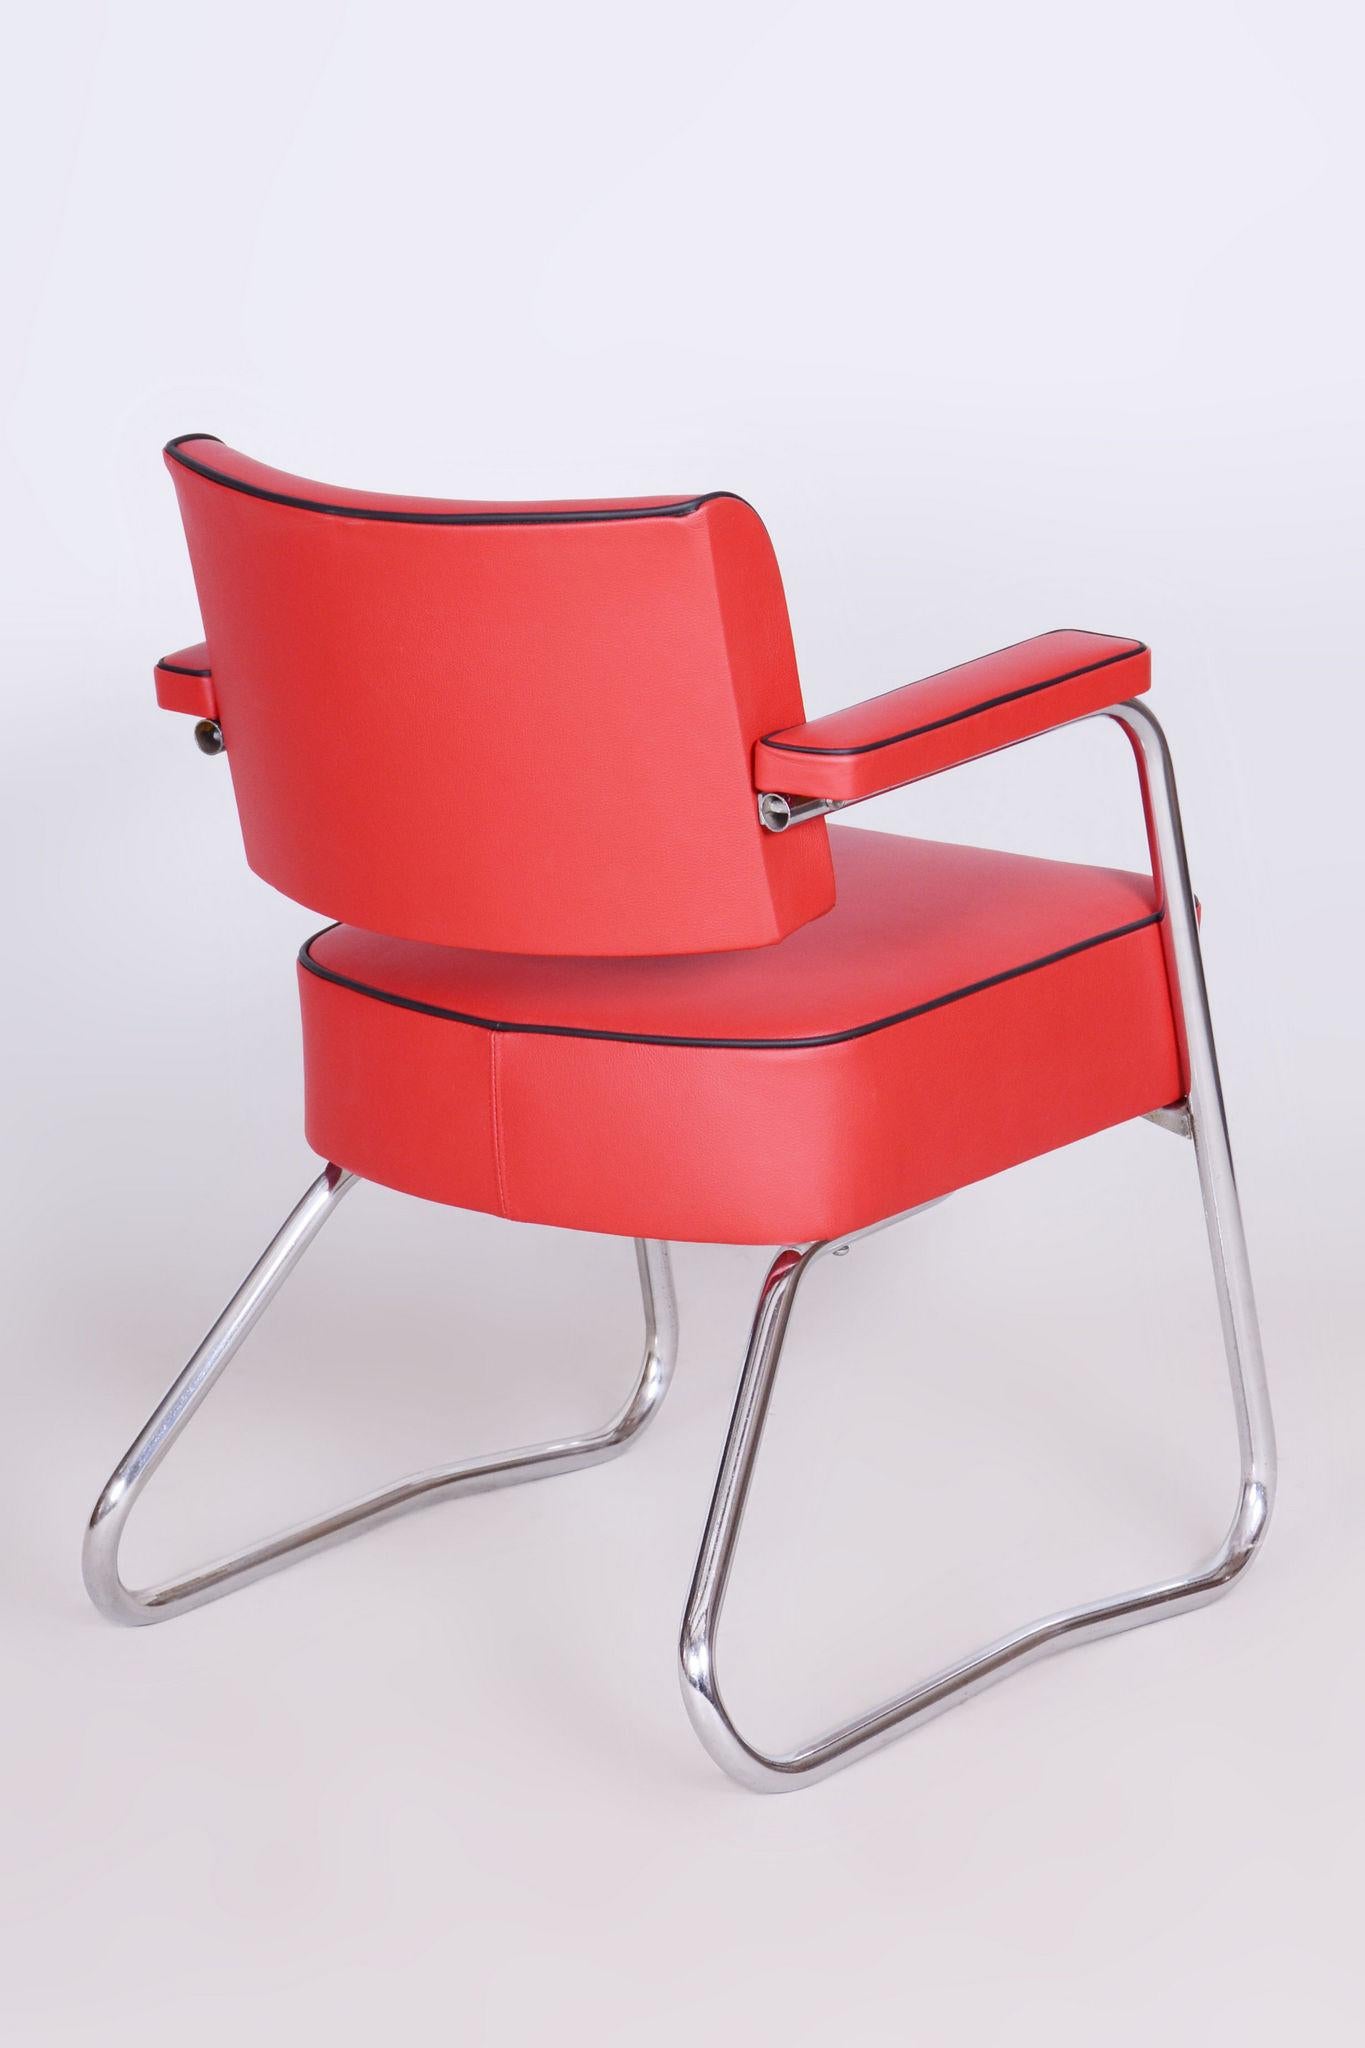 Restored Bauhaus Armchair, Mauser, G. Rohde, Chrome, Leather, Germany, 1930s In Good Condition For Sale In Horomerice, CZ